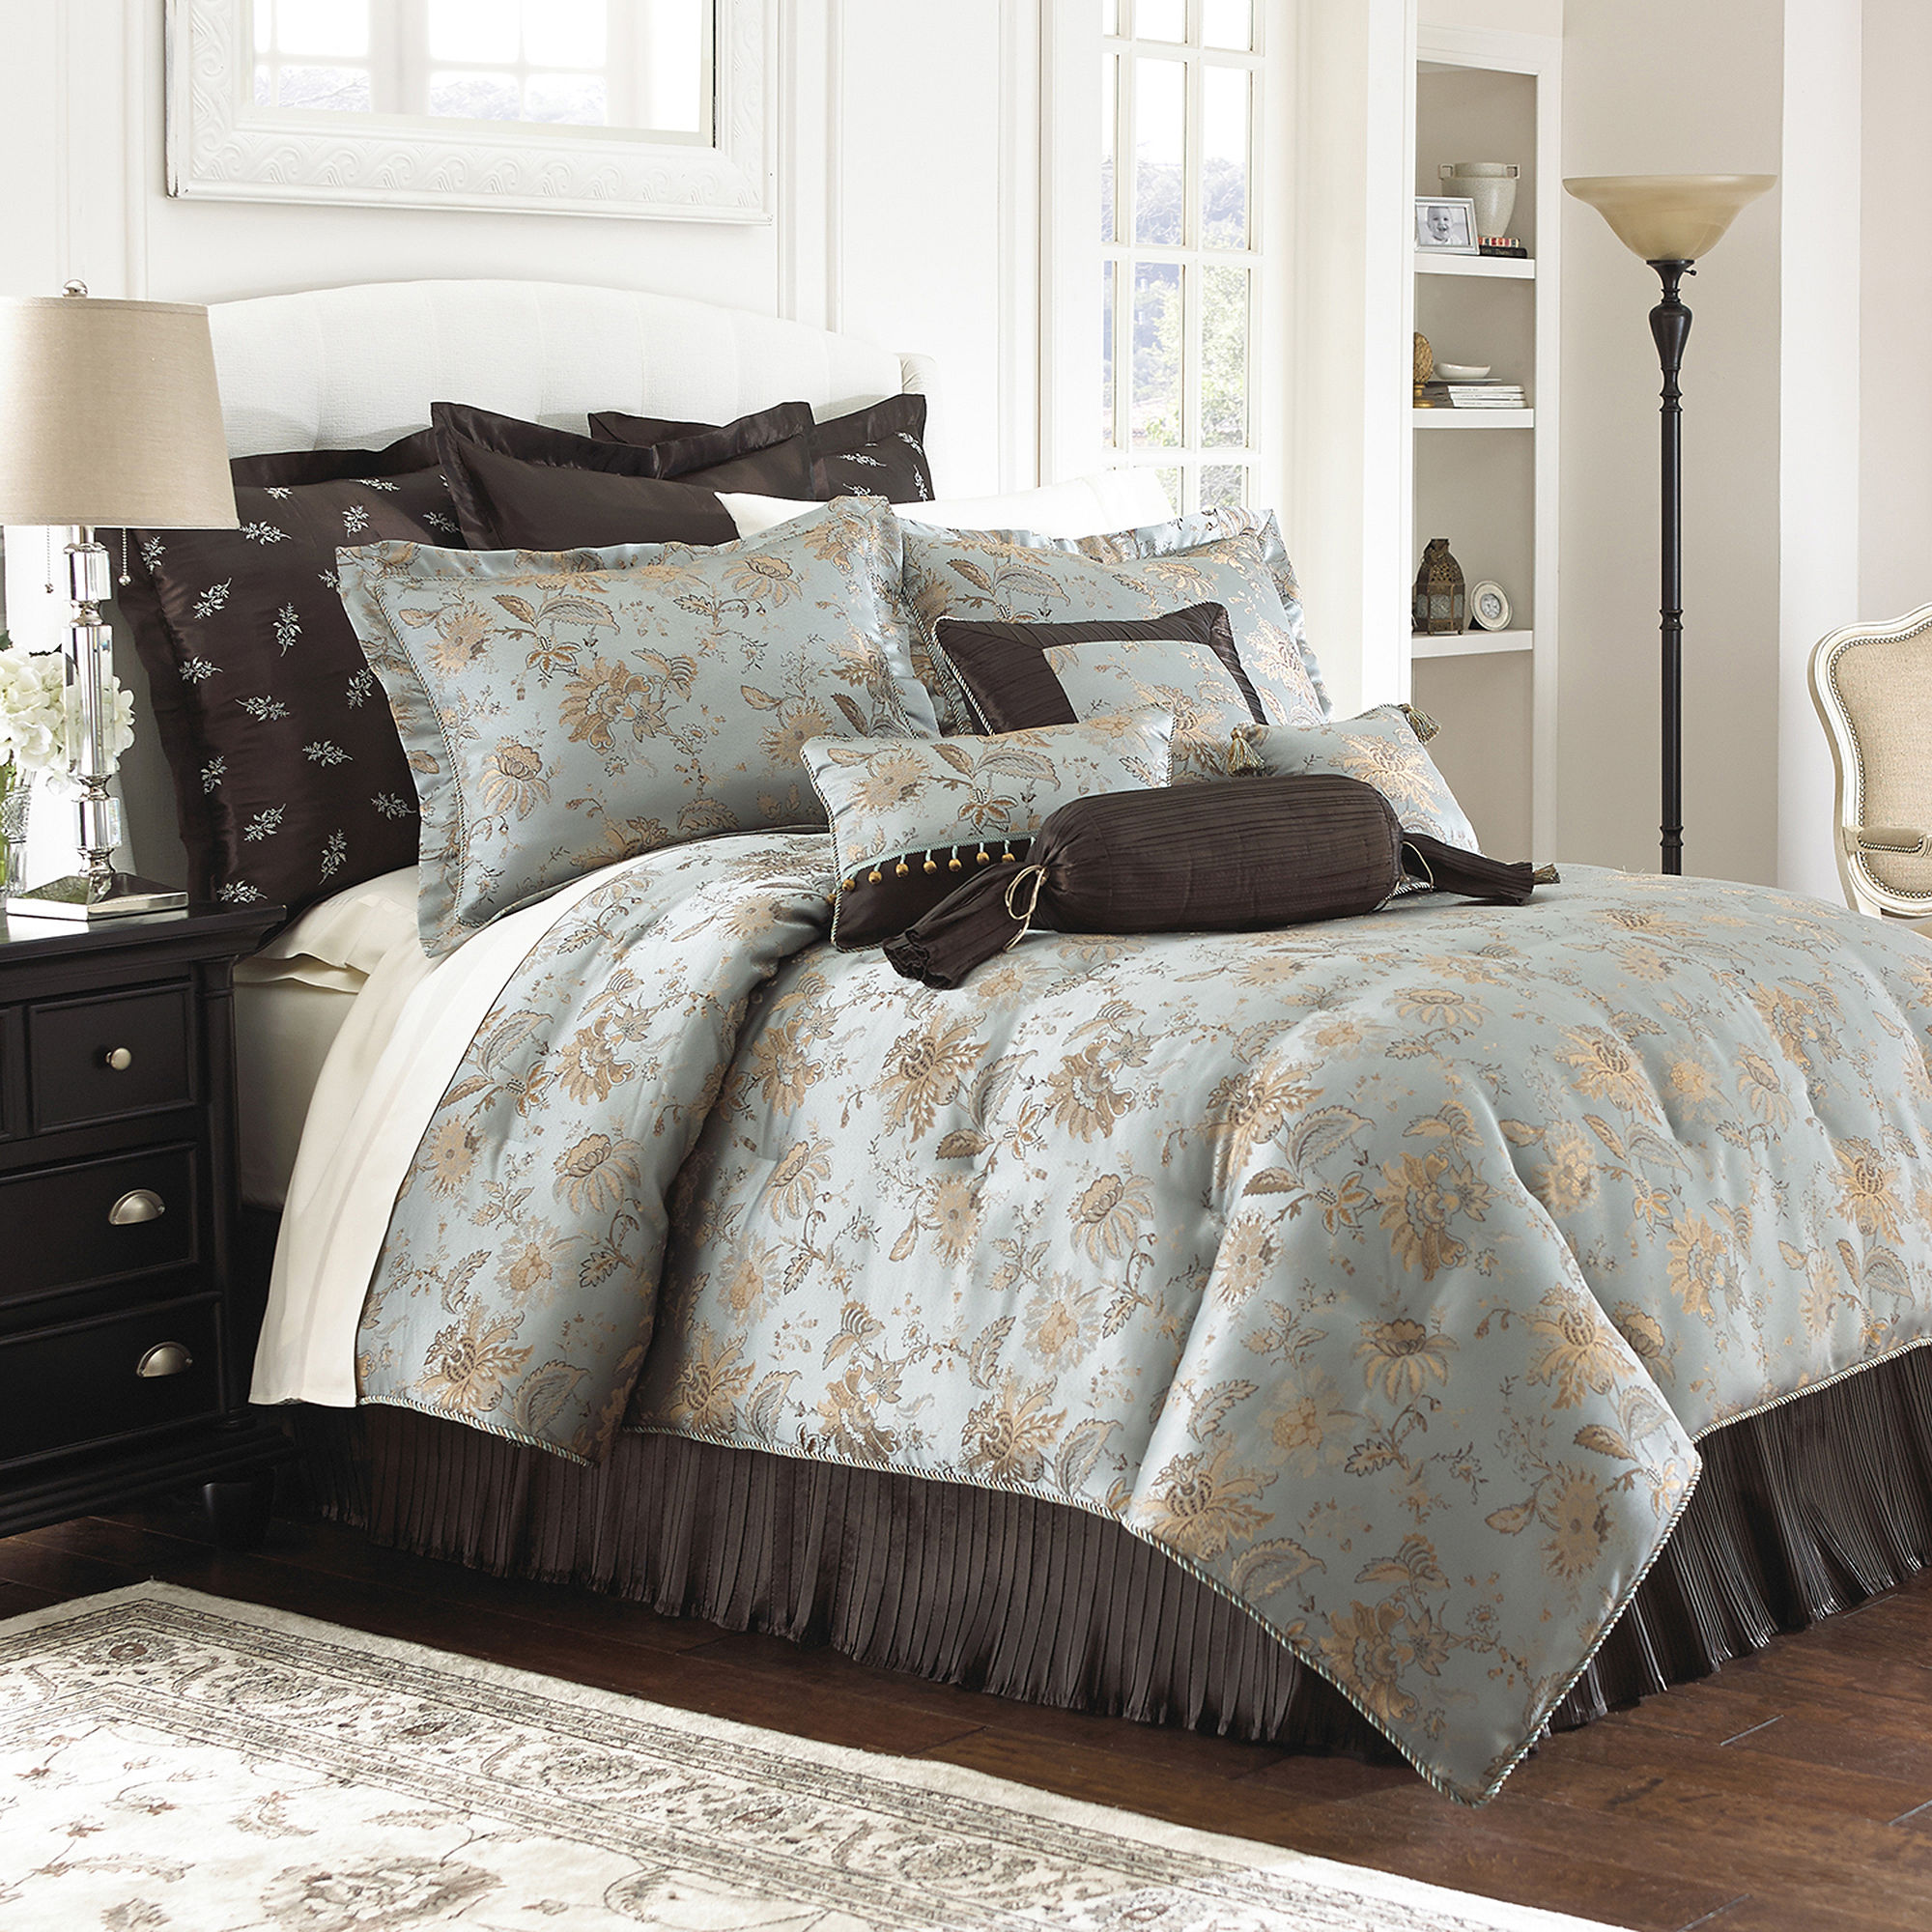 Marquis by Waterford Cameron 4-pc. Comforter Set